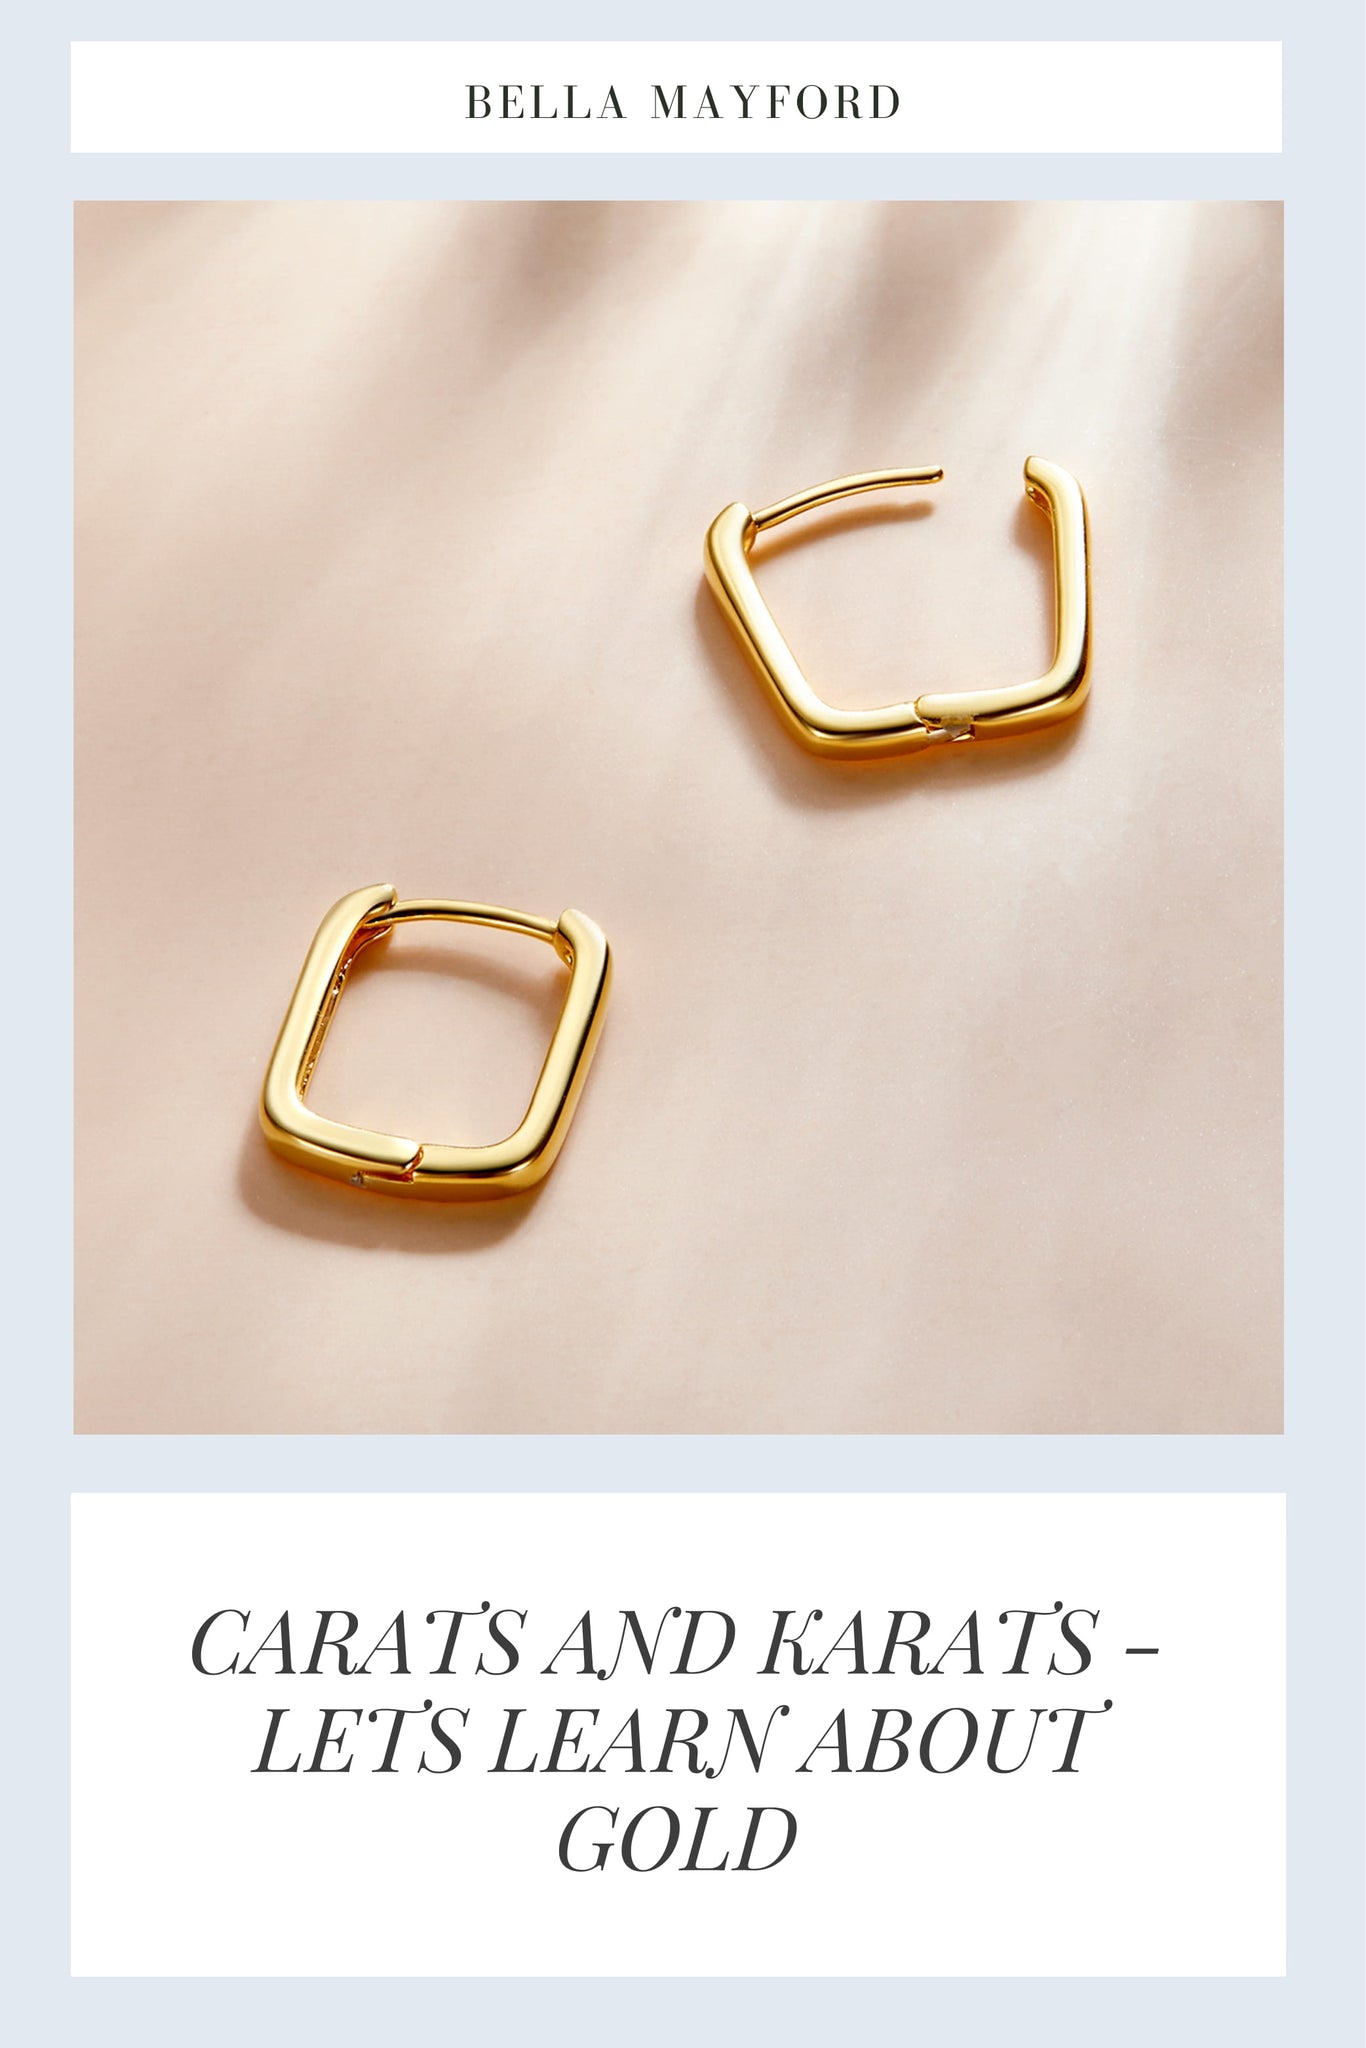 CARATS AND KARATS - LETS LEARN ABOUT GOLD